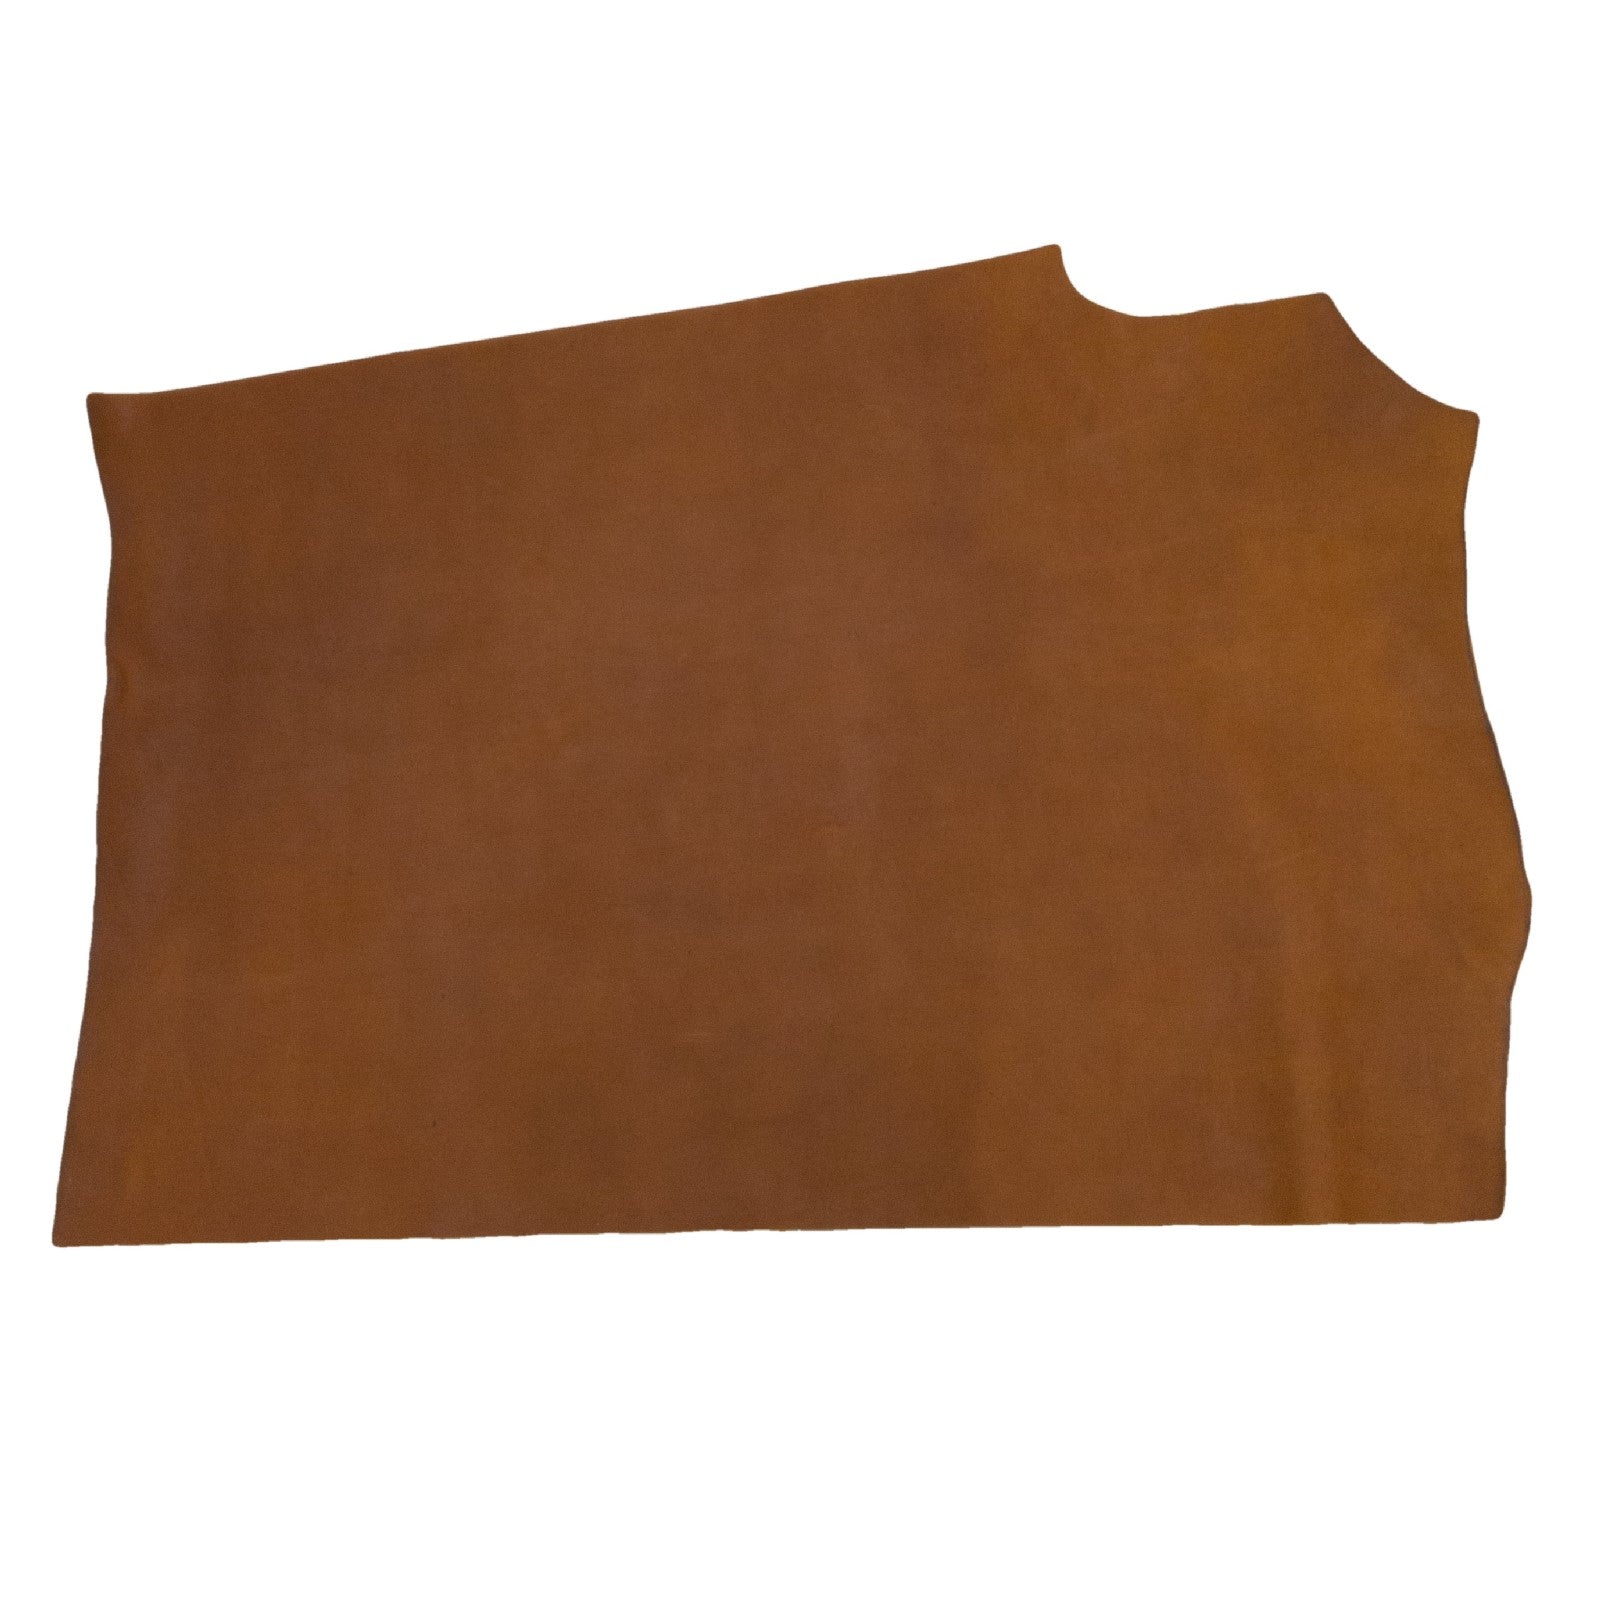 Rustic Russet Red Foothills, Oil Tanned Hides, Summits Edge, Middle Piece / 6.5 - 7.5 Sq Ft | The Leather Guy